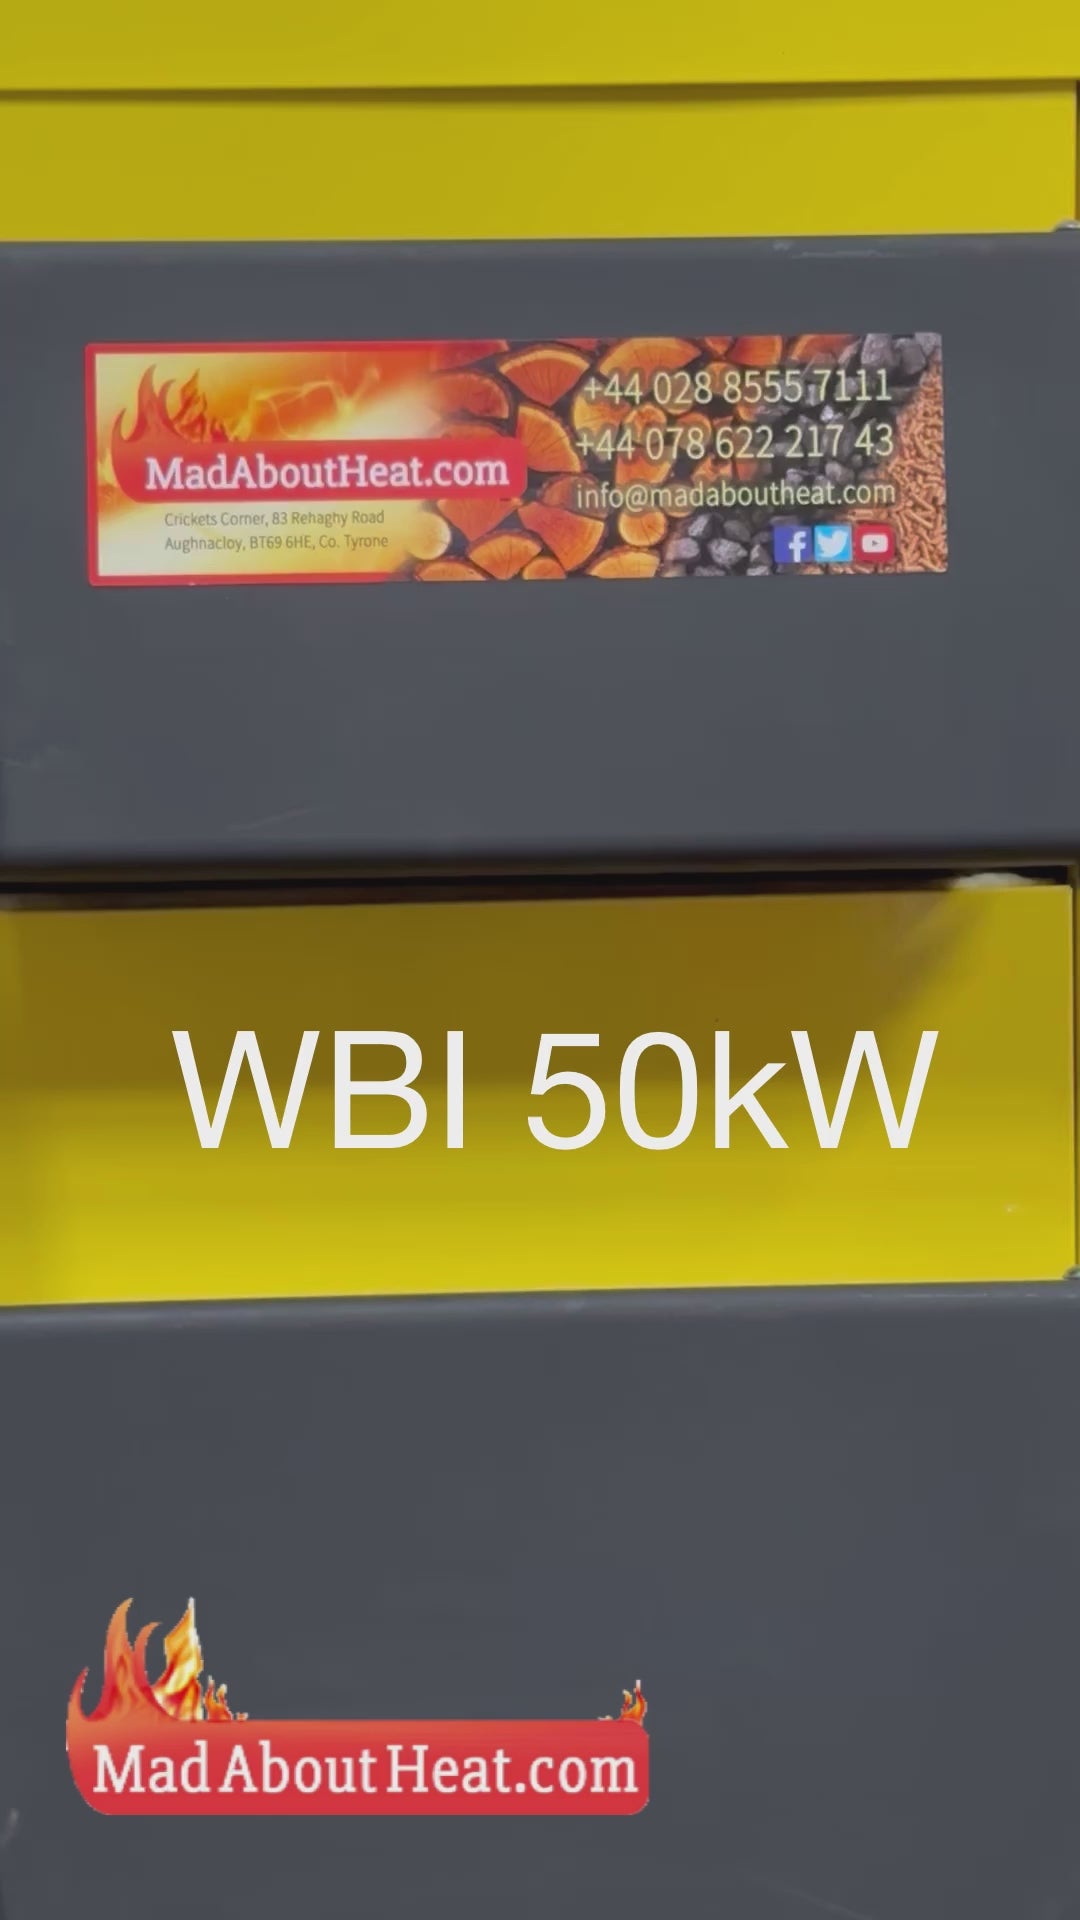 WBI solid fuel boiler video, wood boiler for central heating, biomass boilers for sale